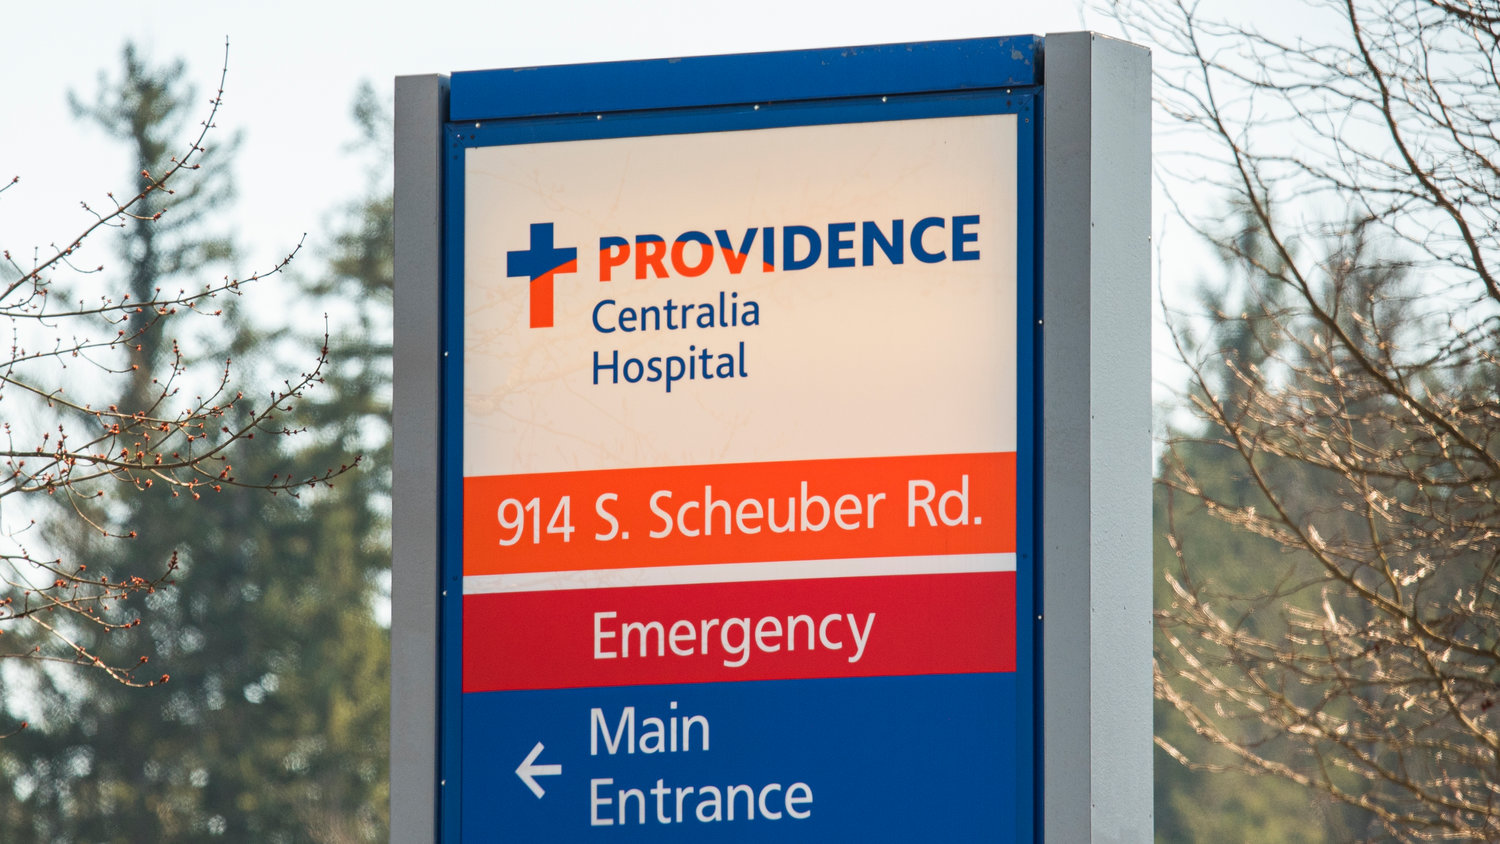 Providence Centralia Hospital is located at 914 South Scheuber Road in Centralia.